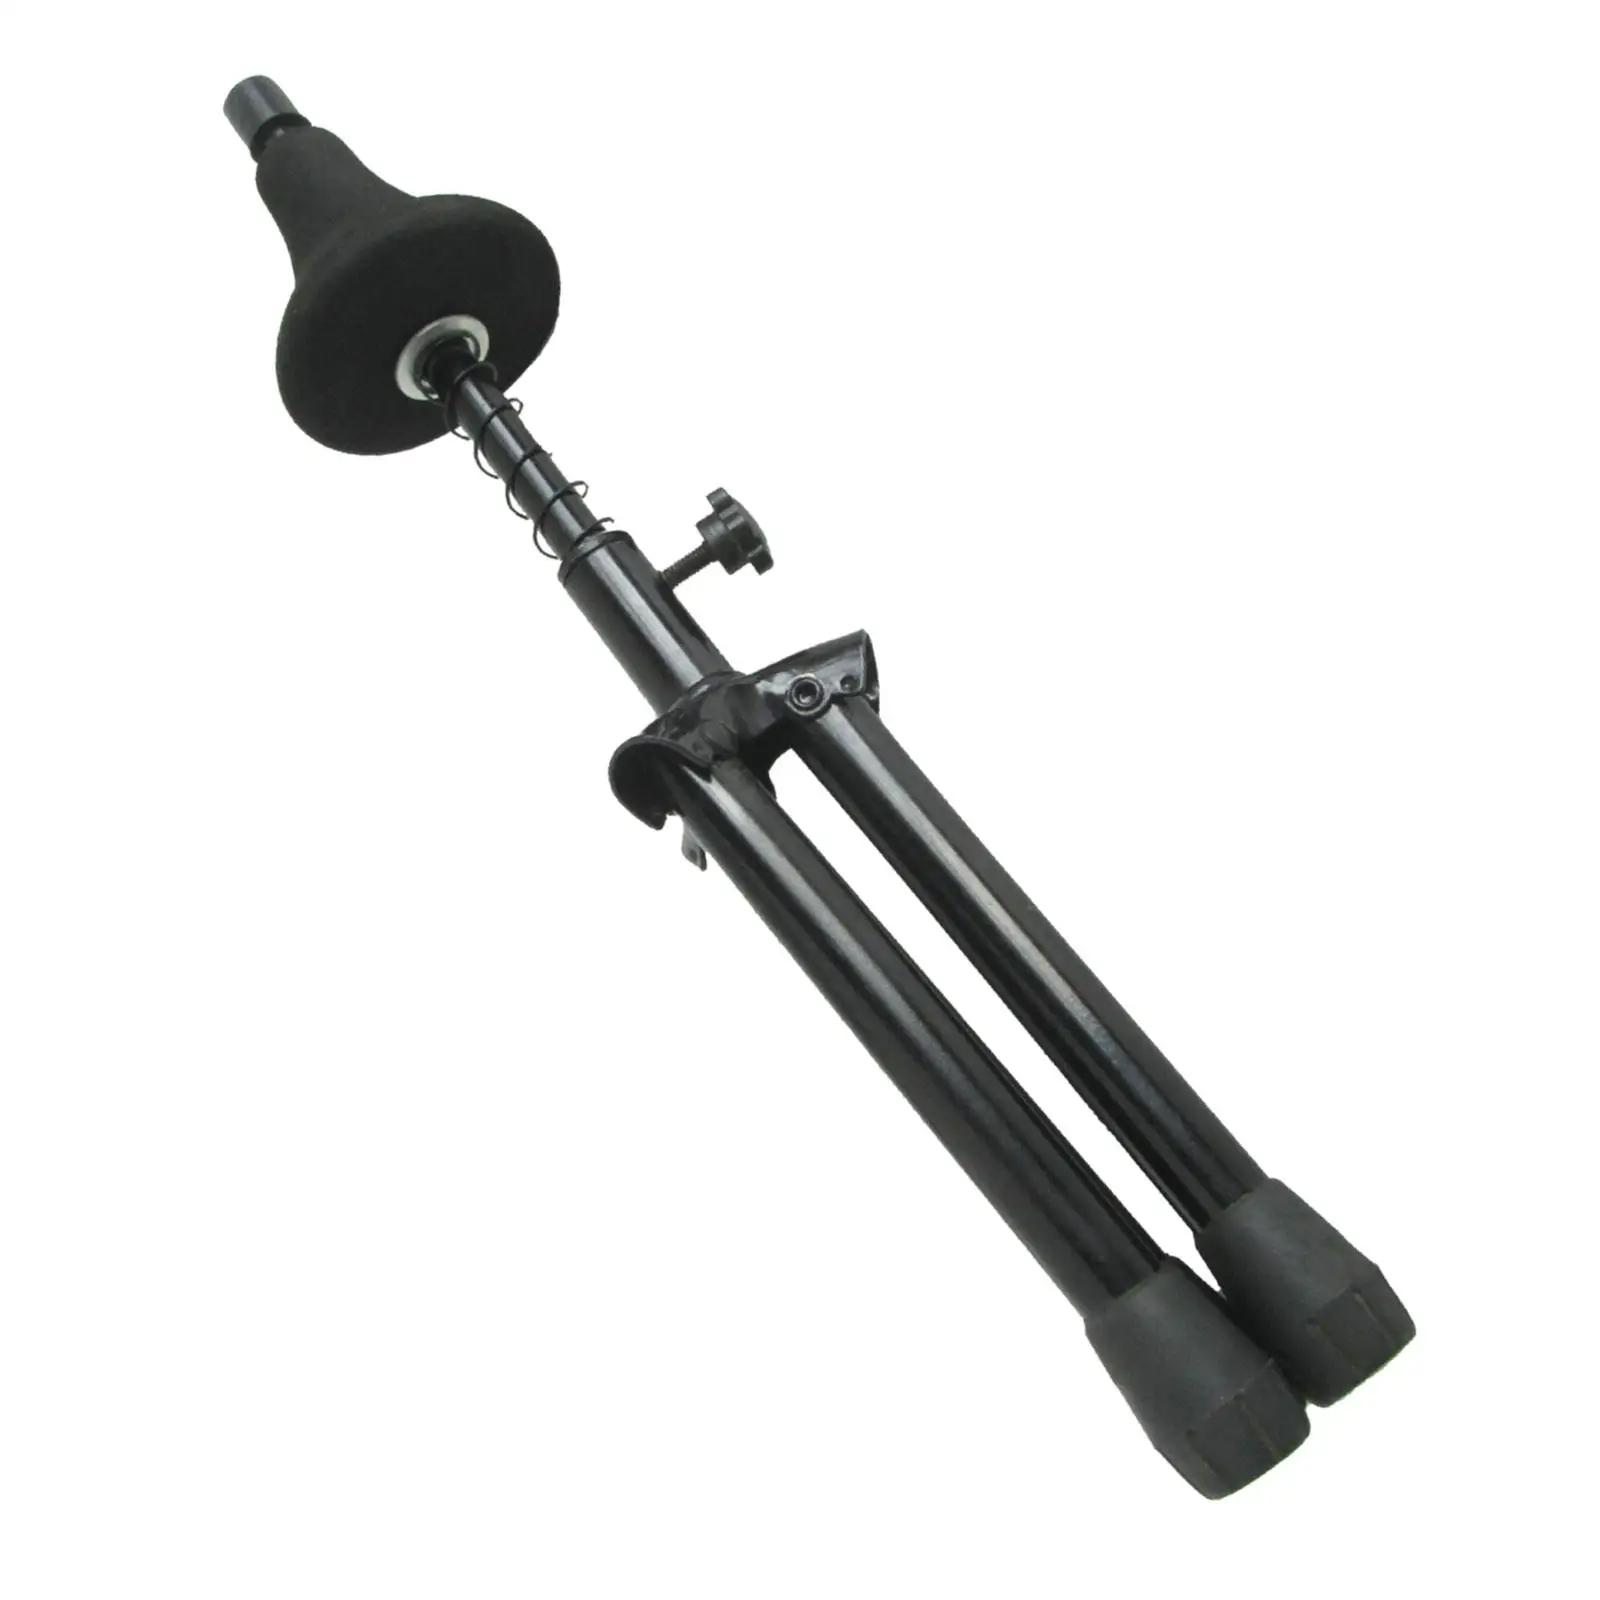 

Trumpet Stand Stable Base Tripod Holder Compact for Brass Instruments Detachable Musician Gift Clarinet Support Folding